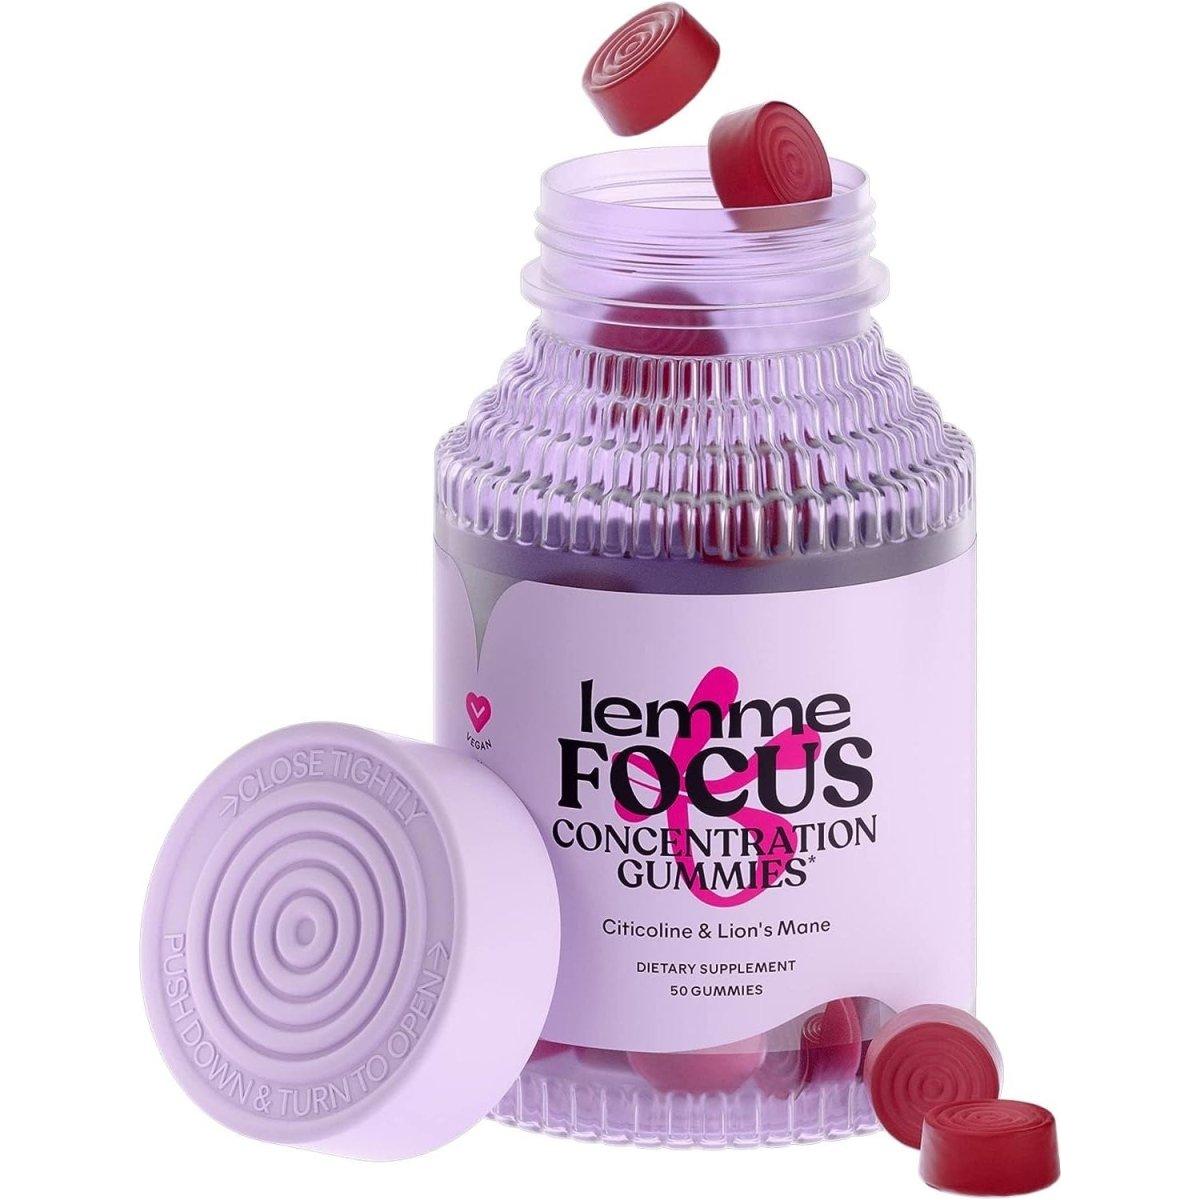 Lemme Focus Concentration Gummies - Strawberry (50 Count) - Glam Global UK